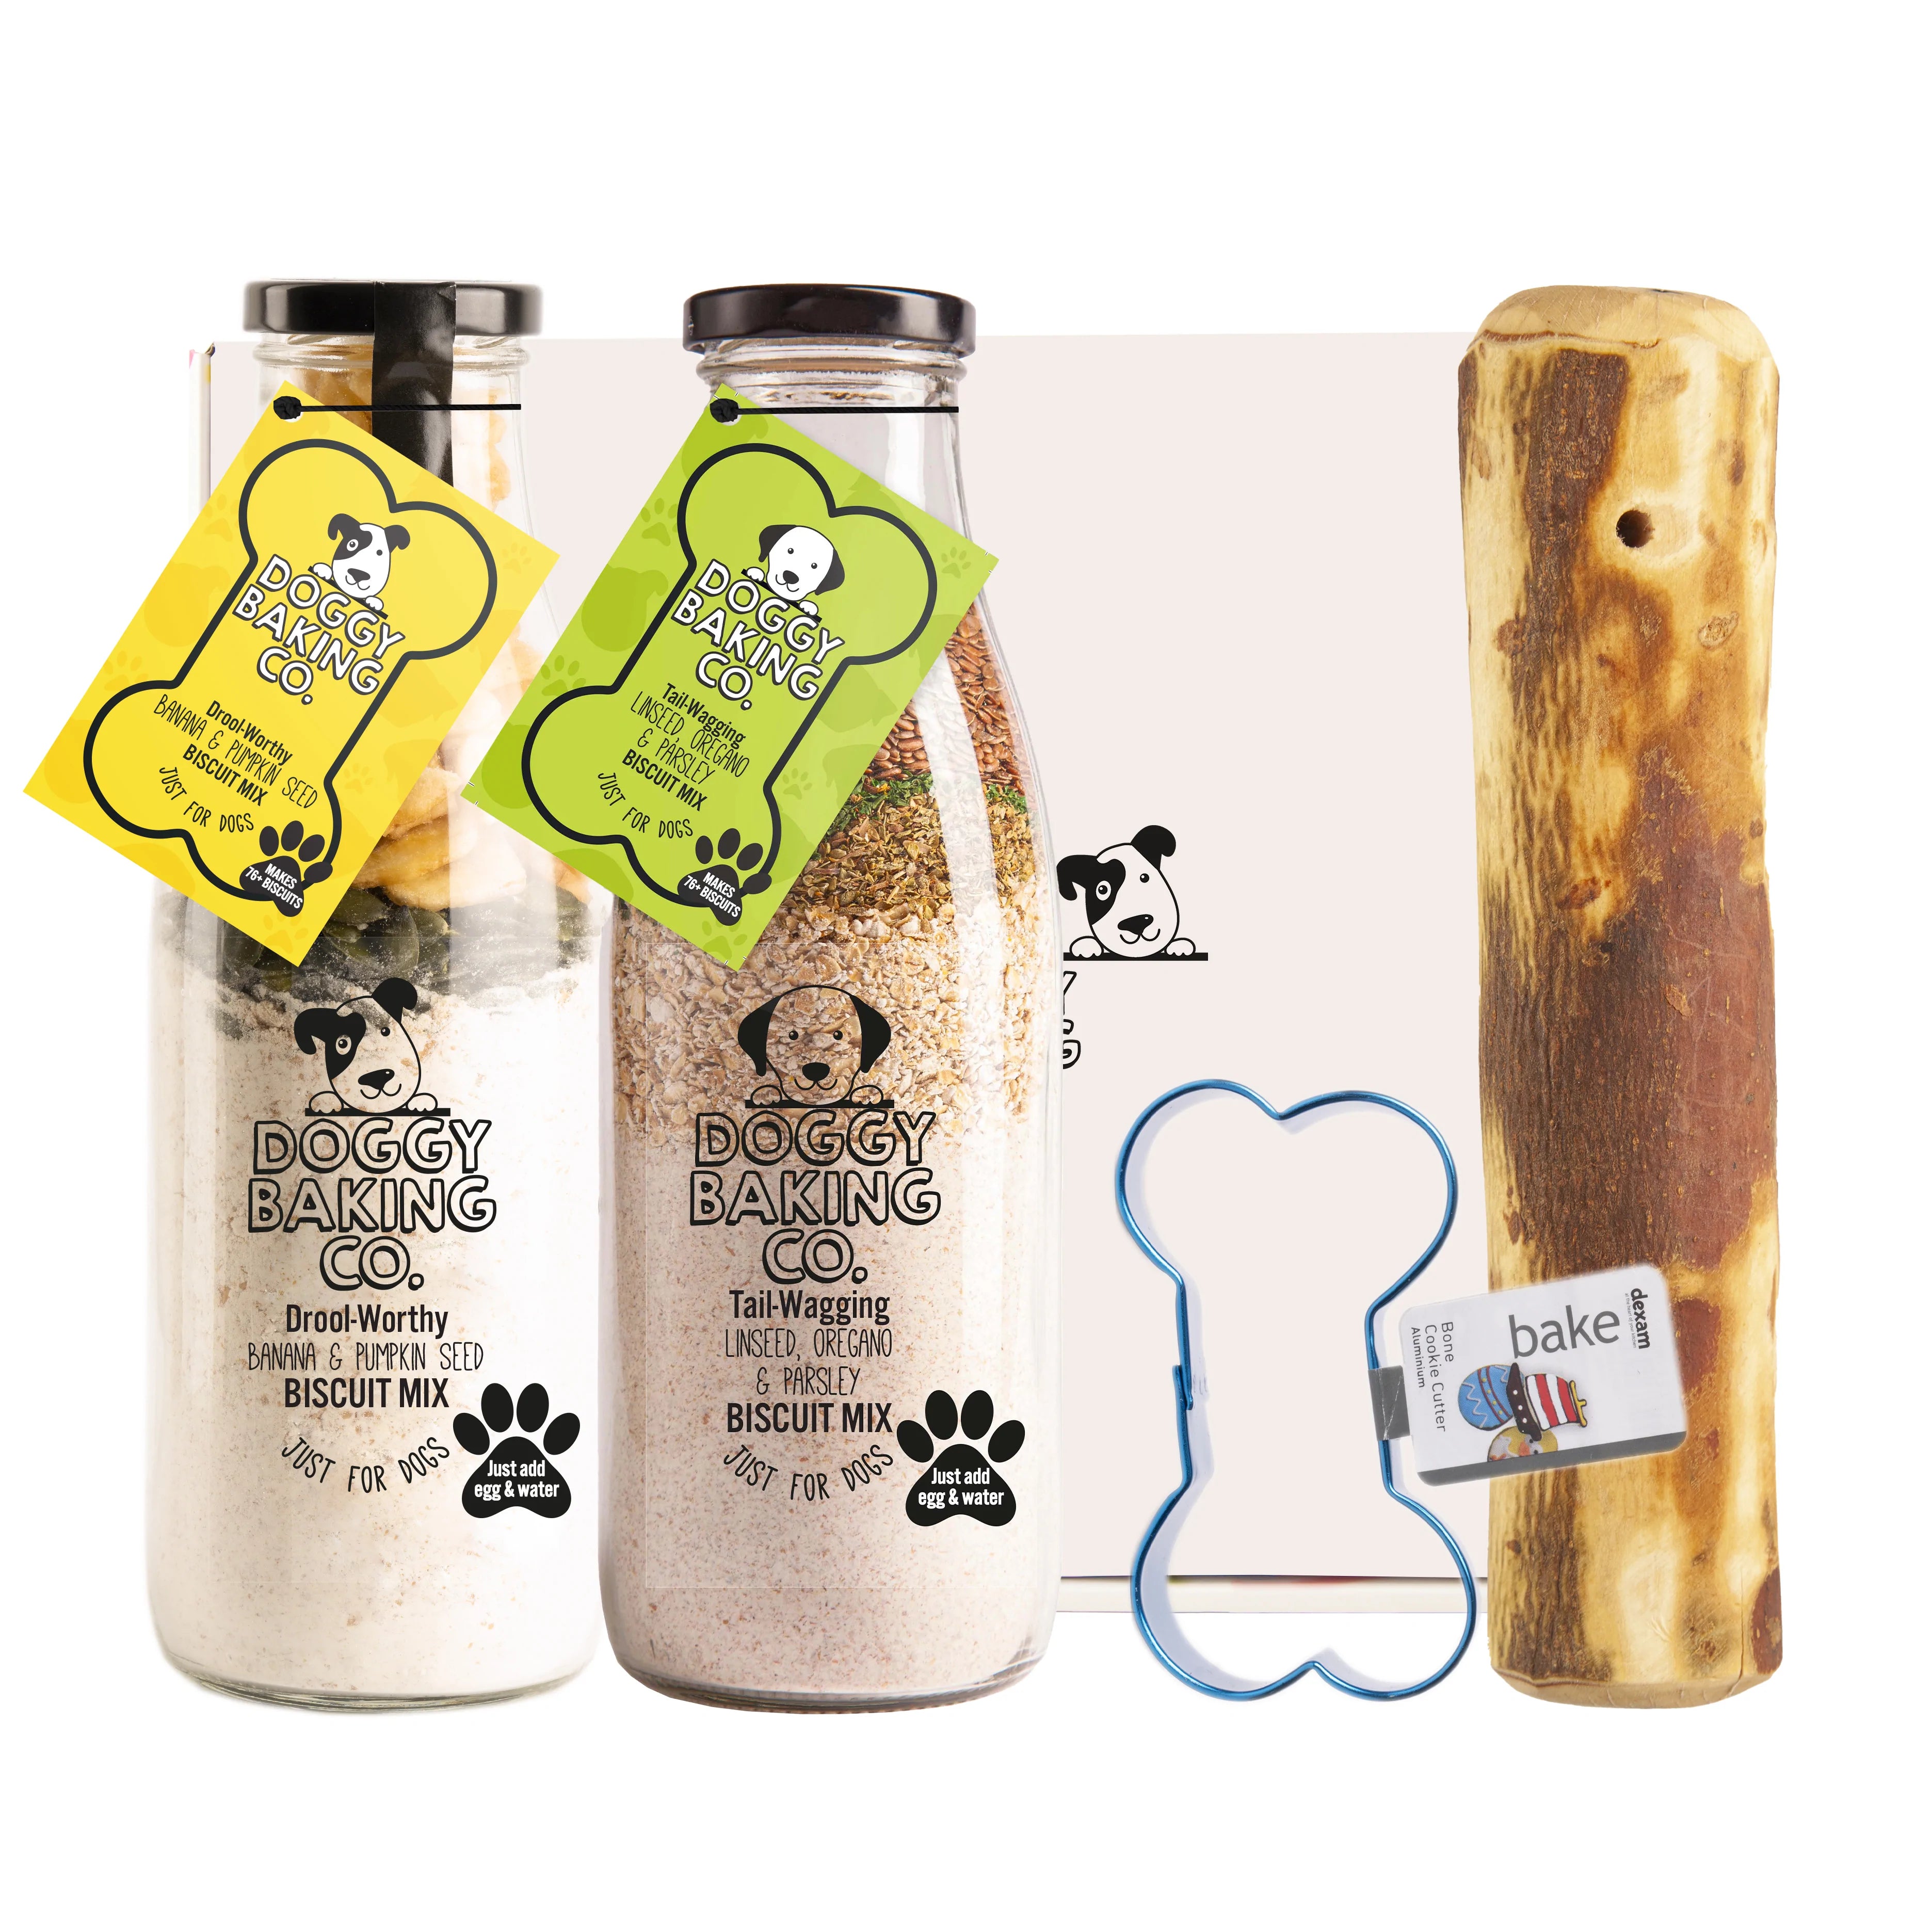 Two Biscuit Bottles, Bone Cutter & Olivewood Chew in a Gift Box - Baking Mix - Bottled Baking Co